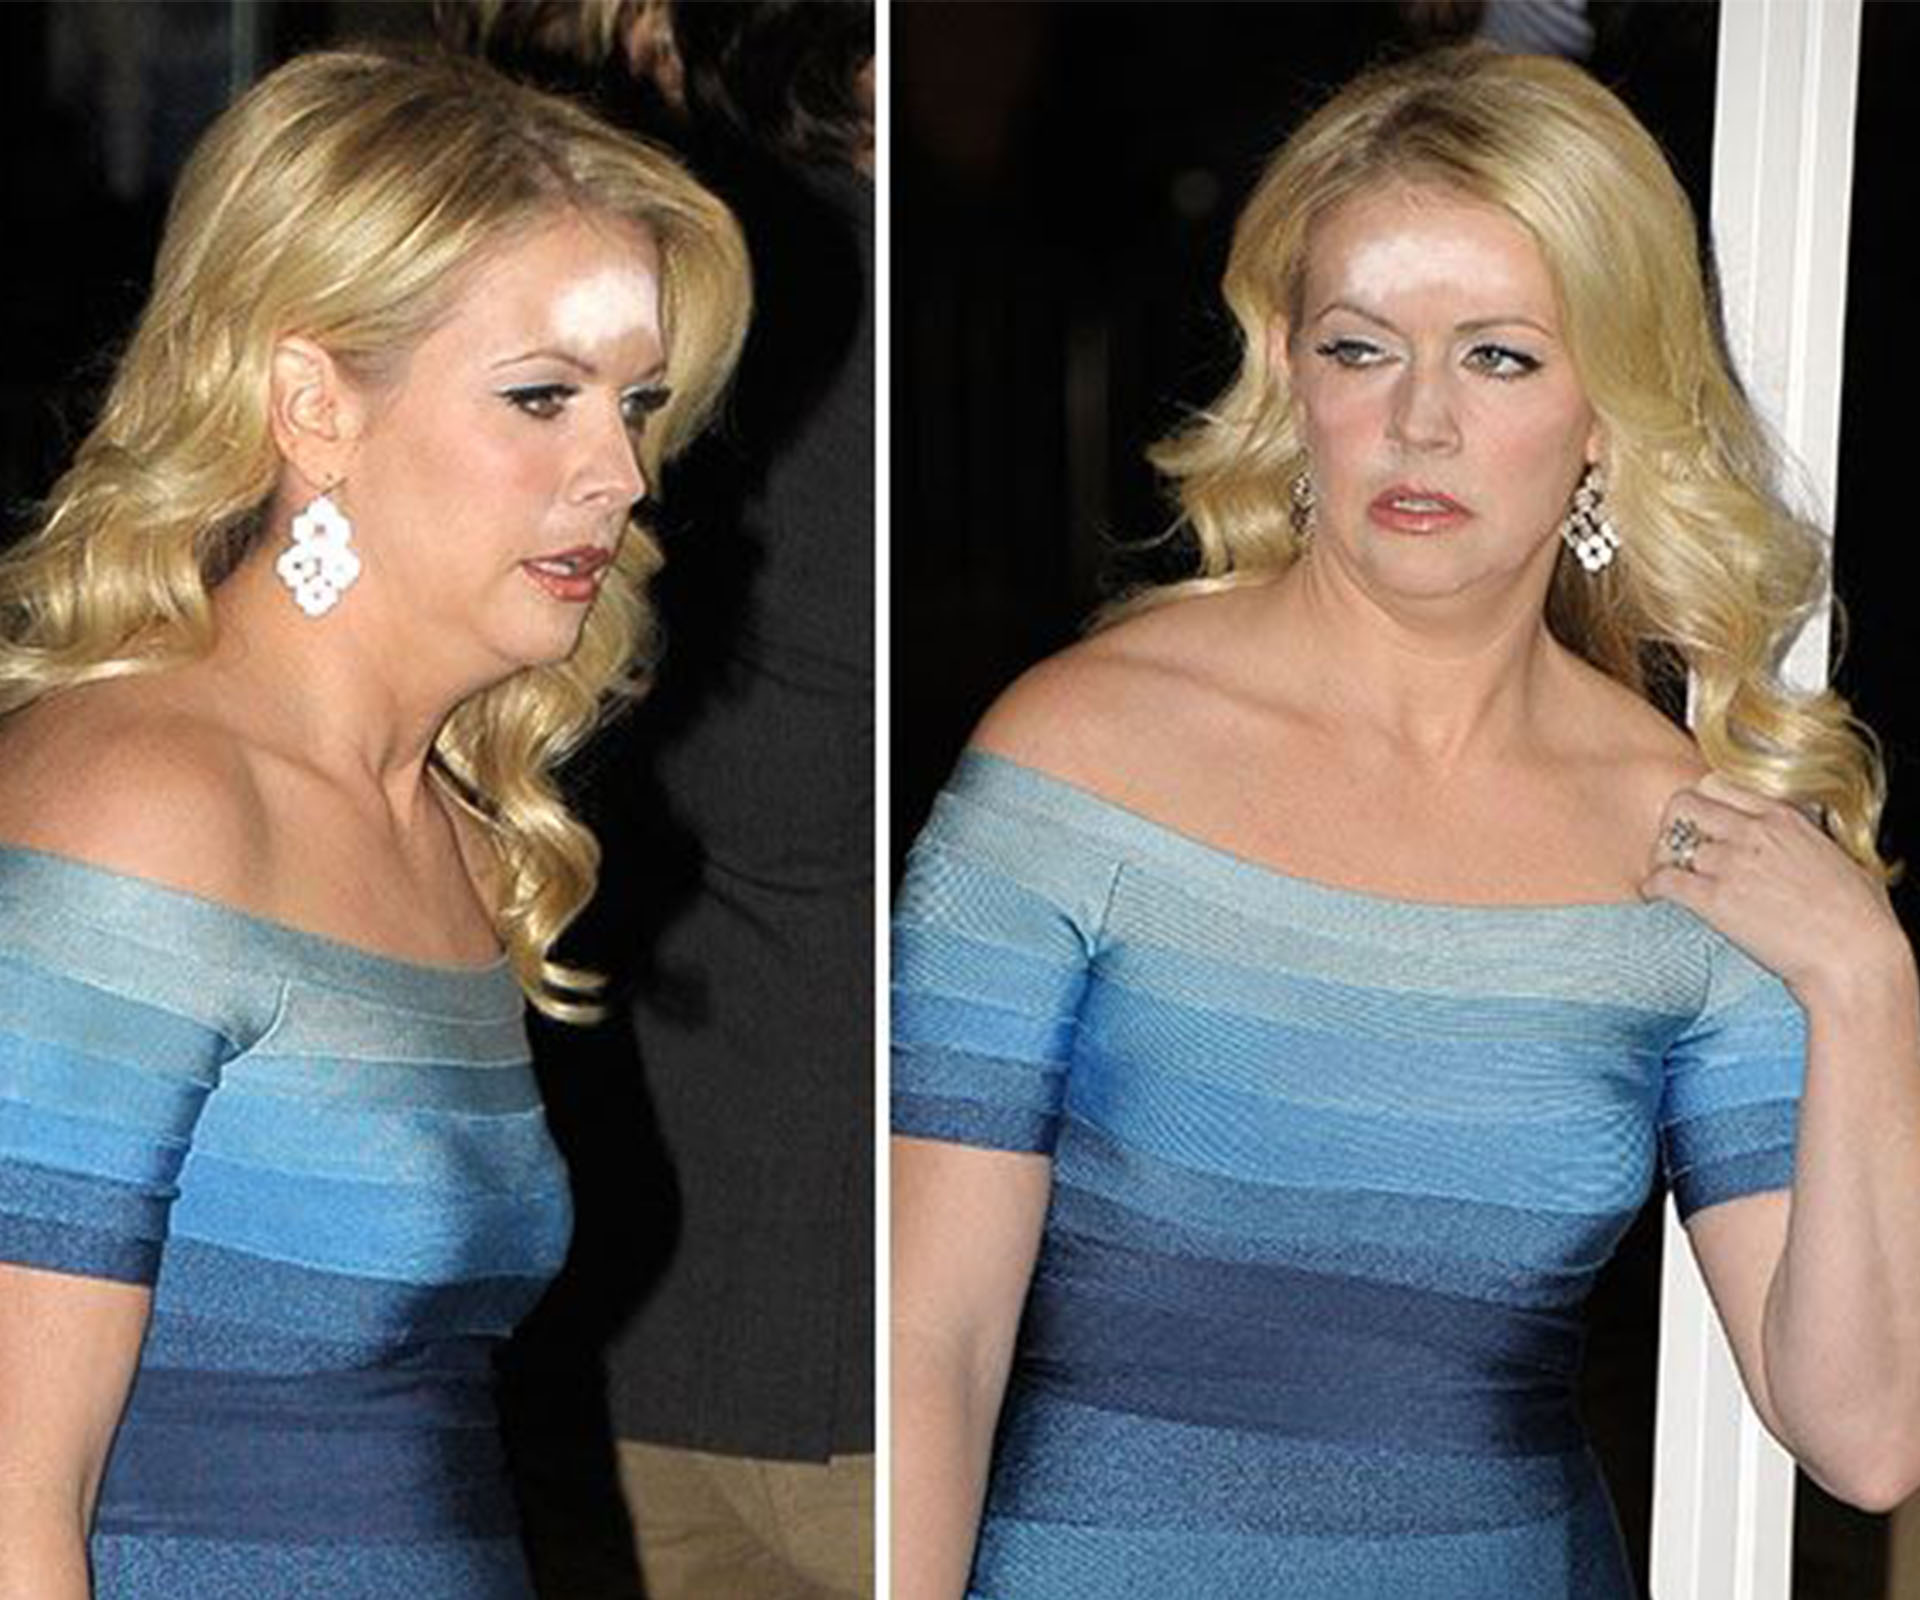 The most embarrassing celebrity makeup malfunctions